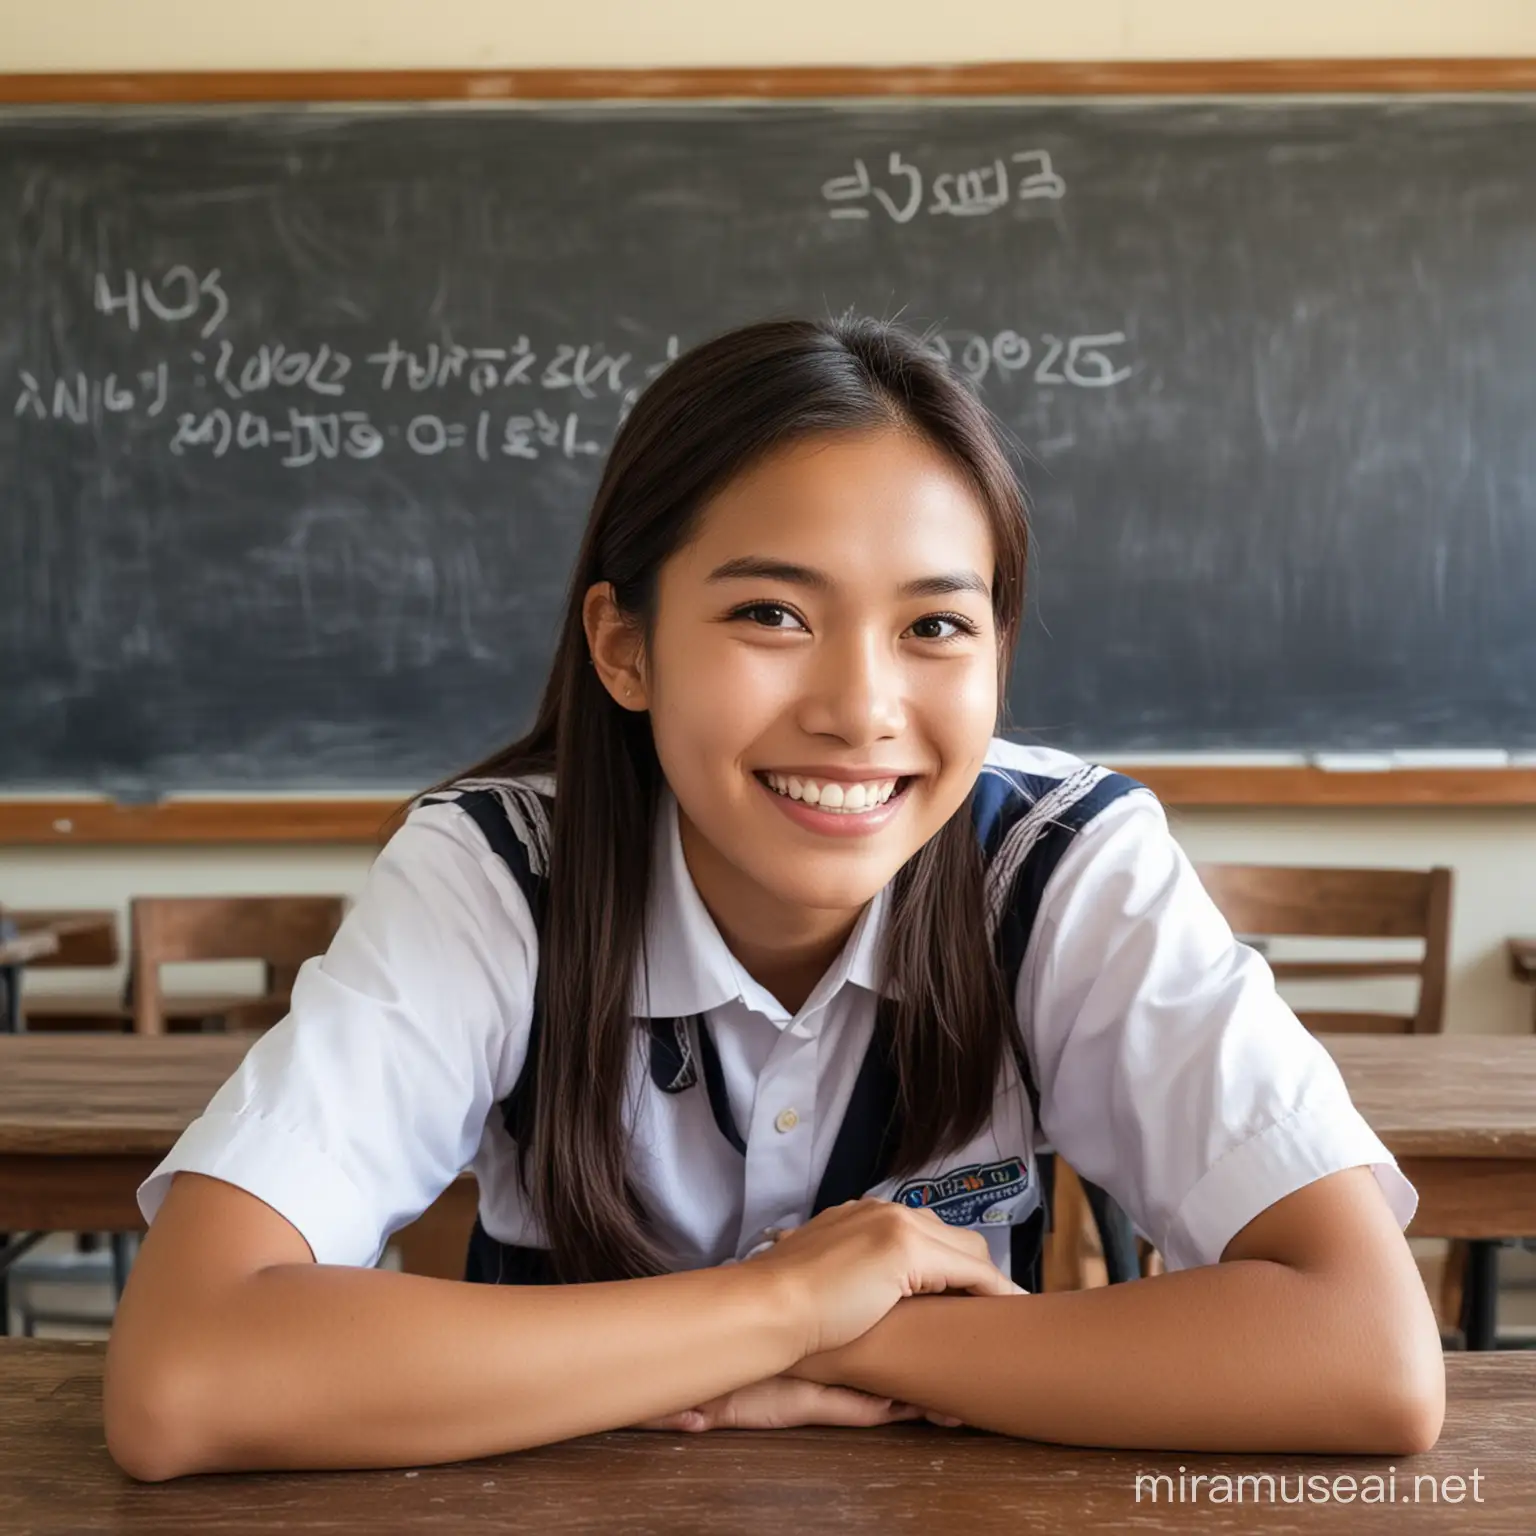 Thai high school girl student In a high school uniform from Thailand, sitting at a study table in a classroom. Sitting with a silly smile, showing off his teeth and dimples to the camera. On the back is a picture of a blackboard in a classroom in the country.